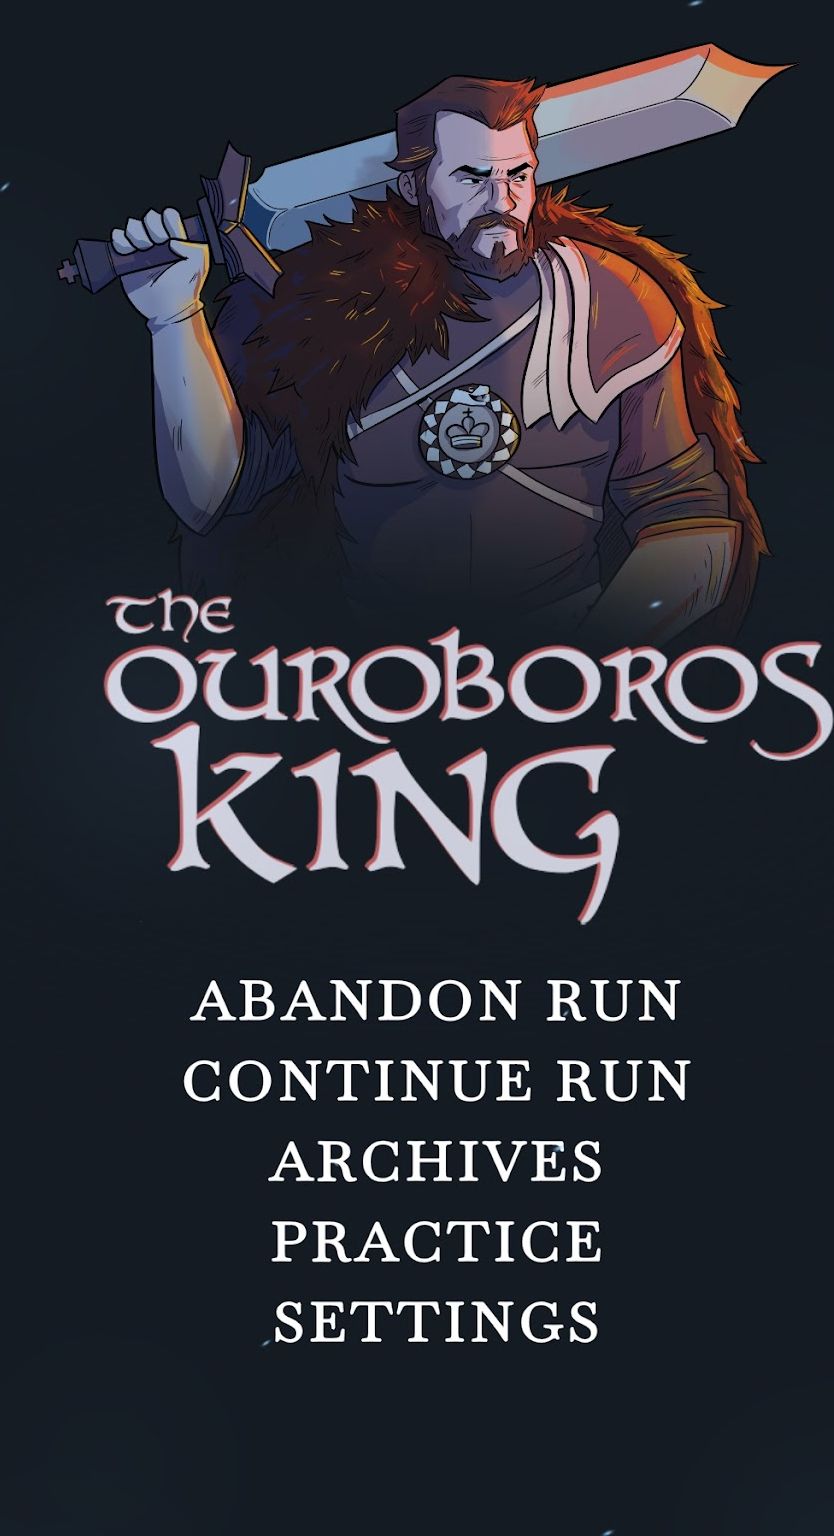 Download Ouroboros King Chess Roguelike Android free game.